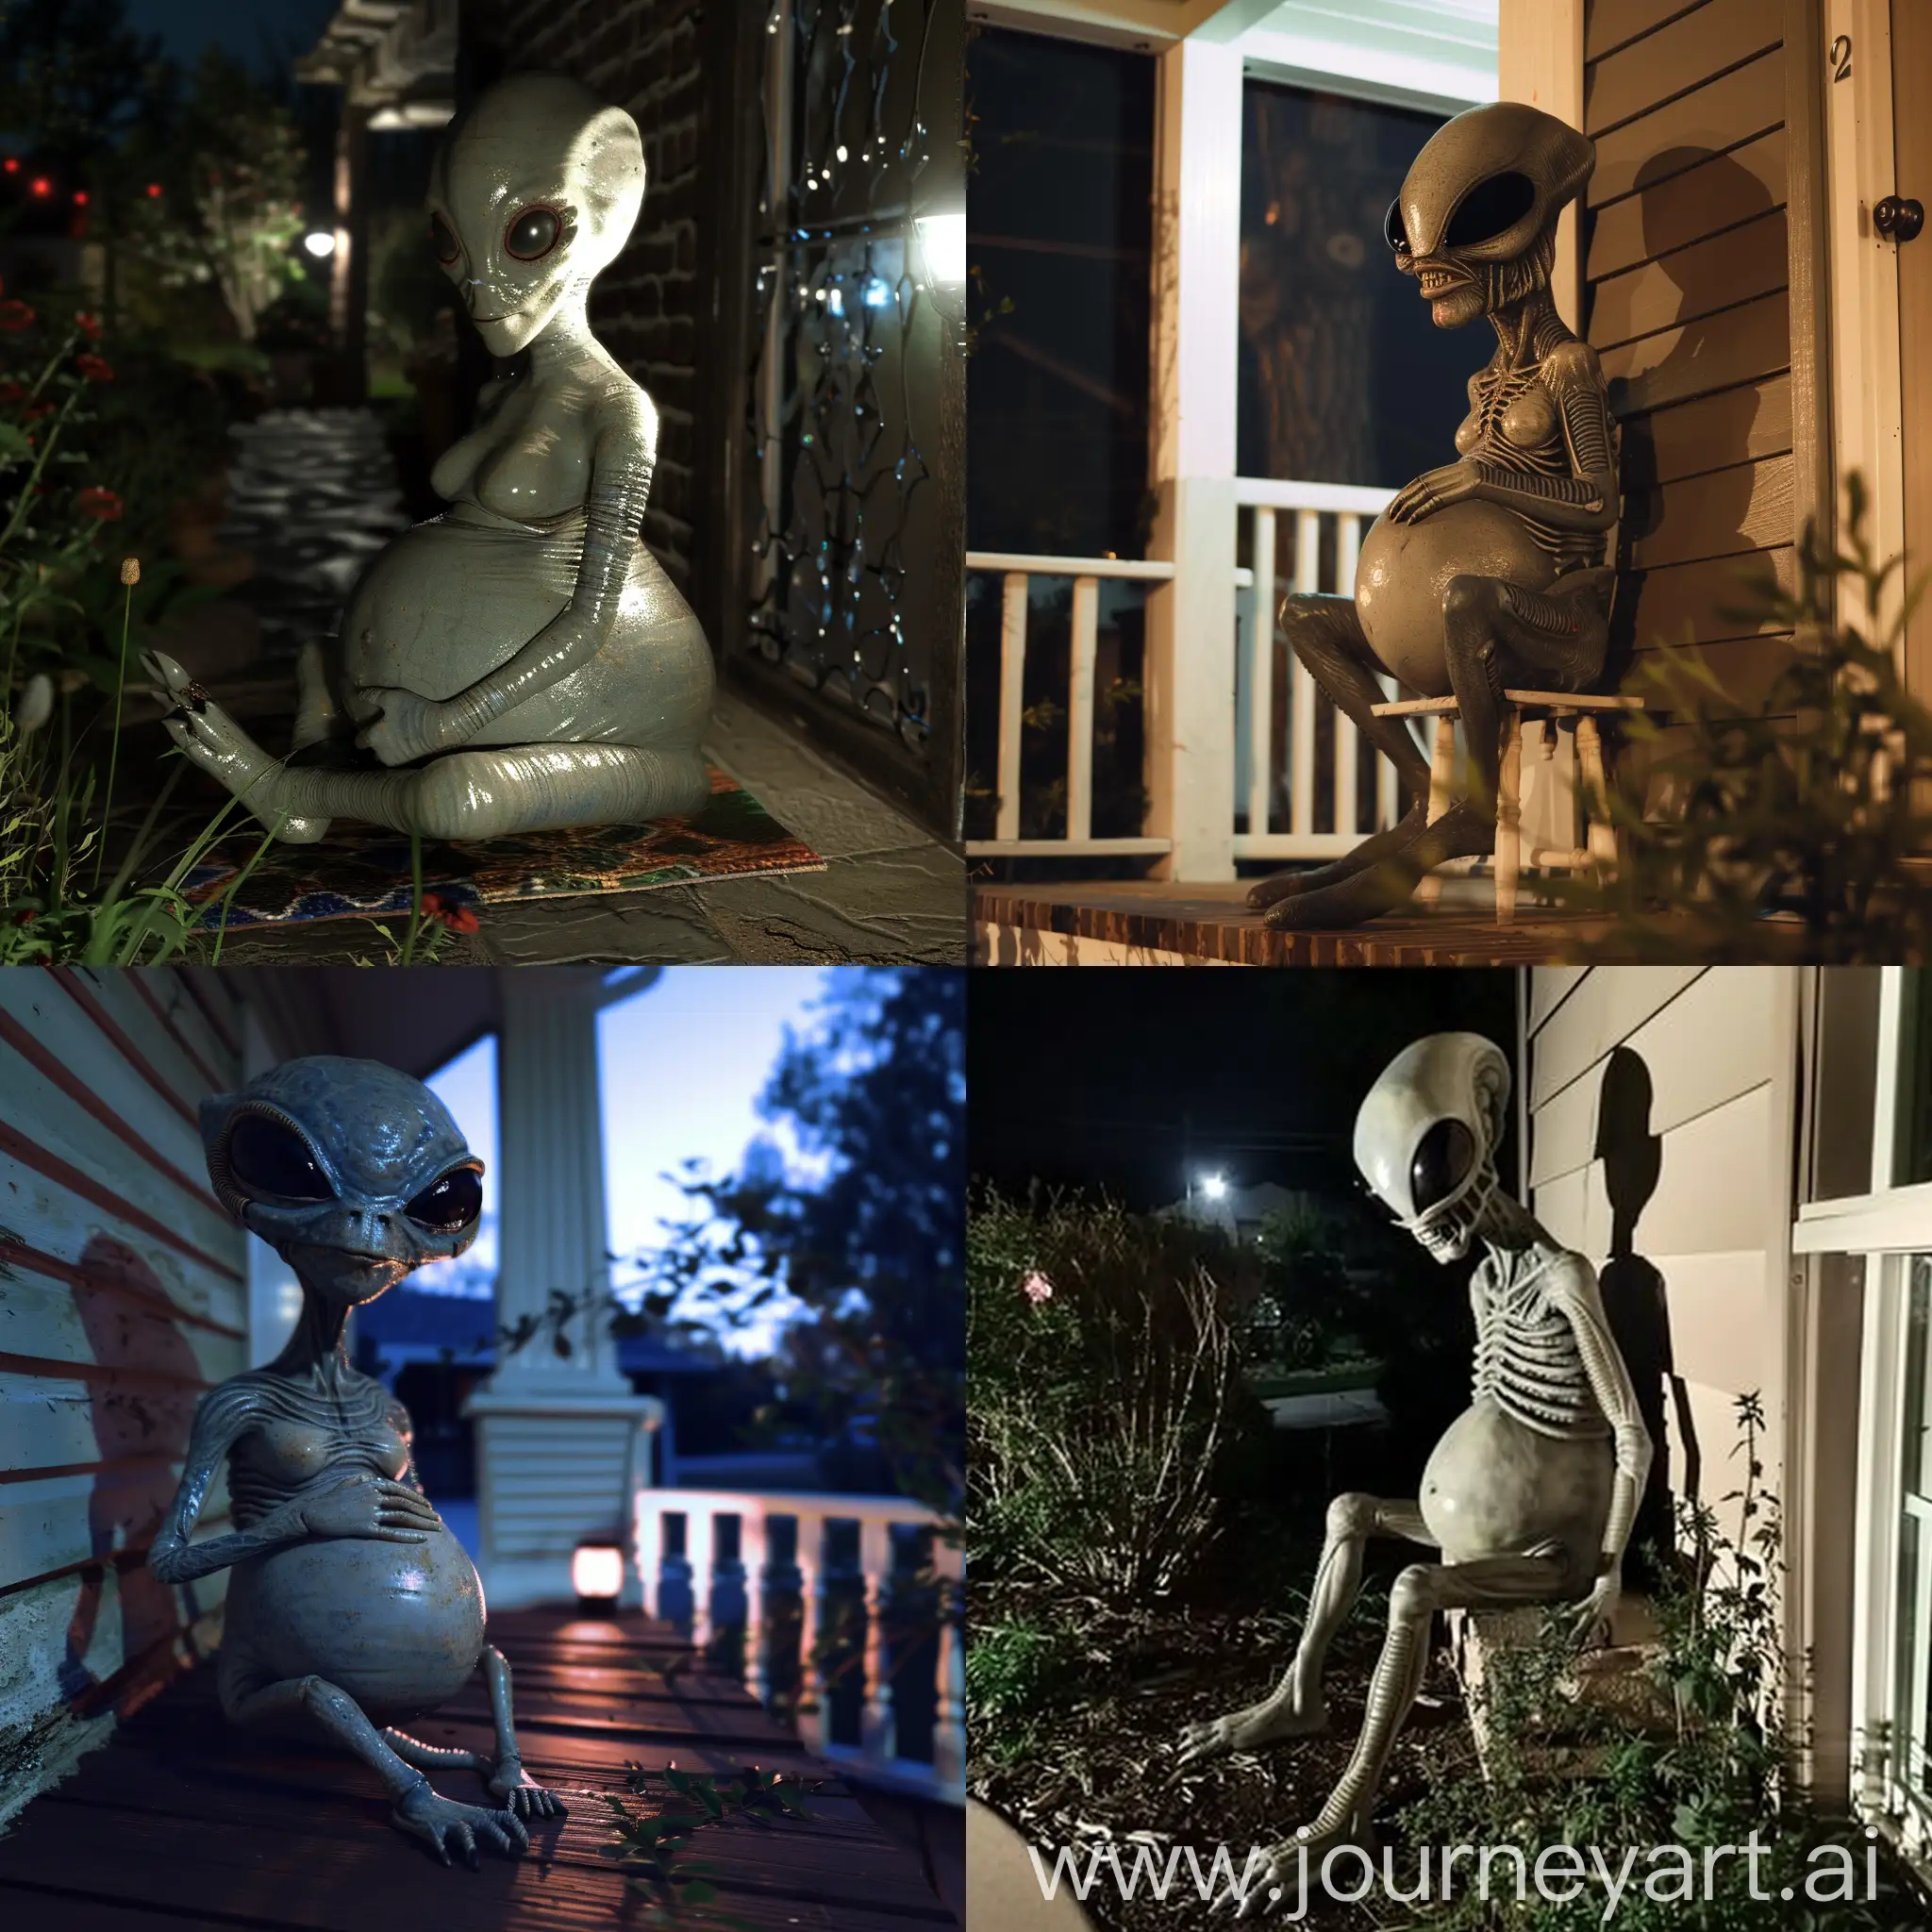 A female gray alien sitting on your porch at night, She is very pregnant. Her pregnant tummy is very large.